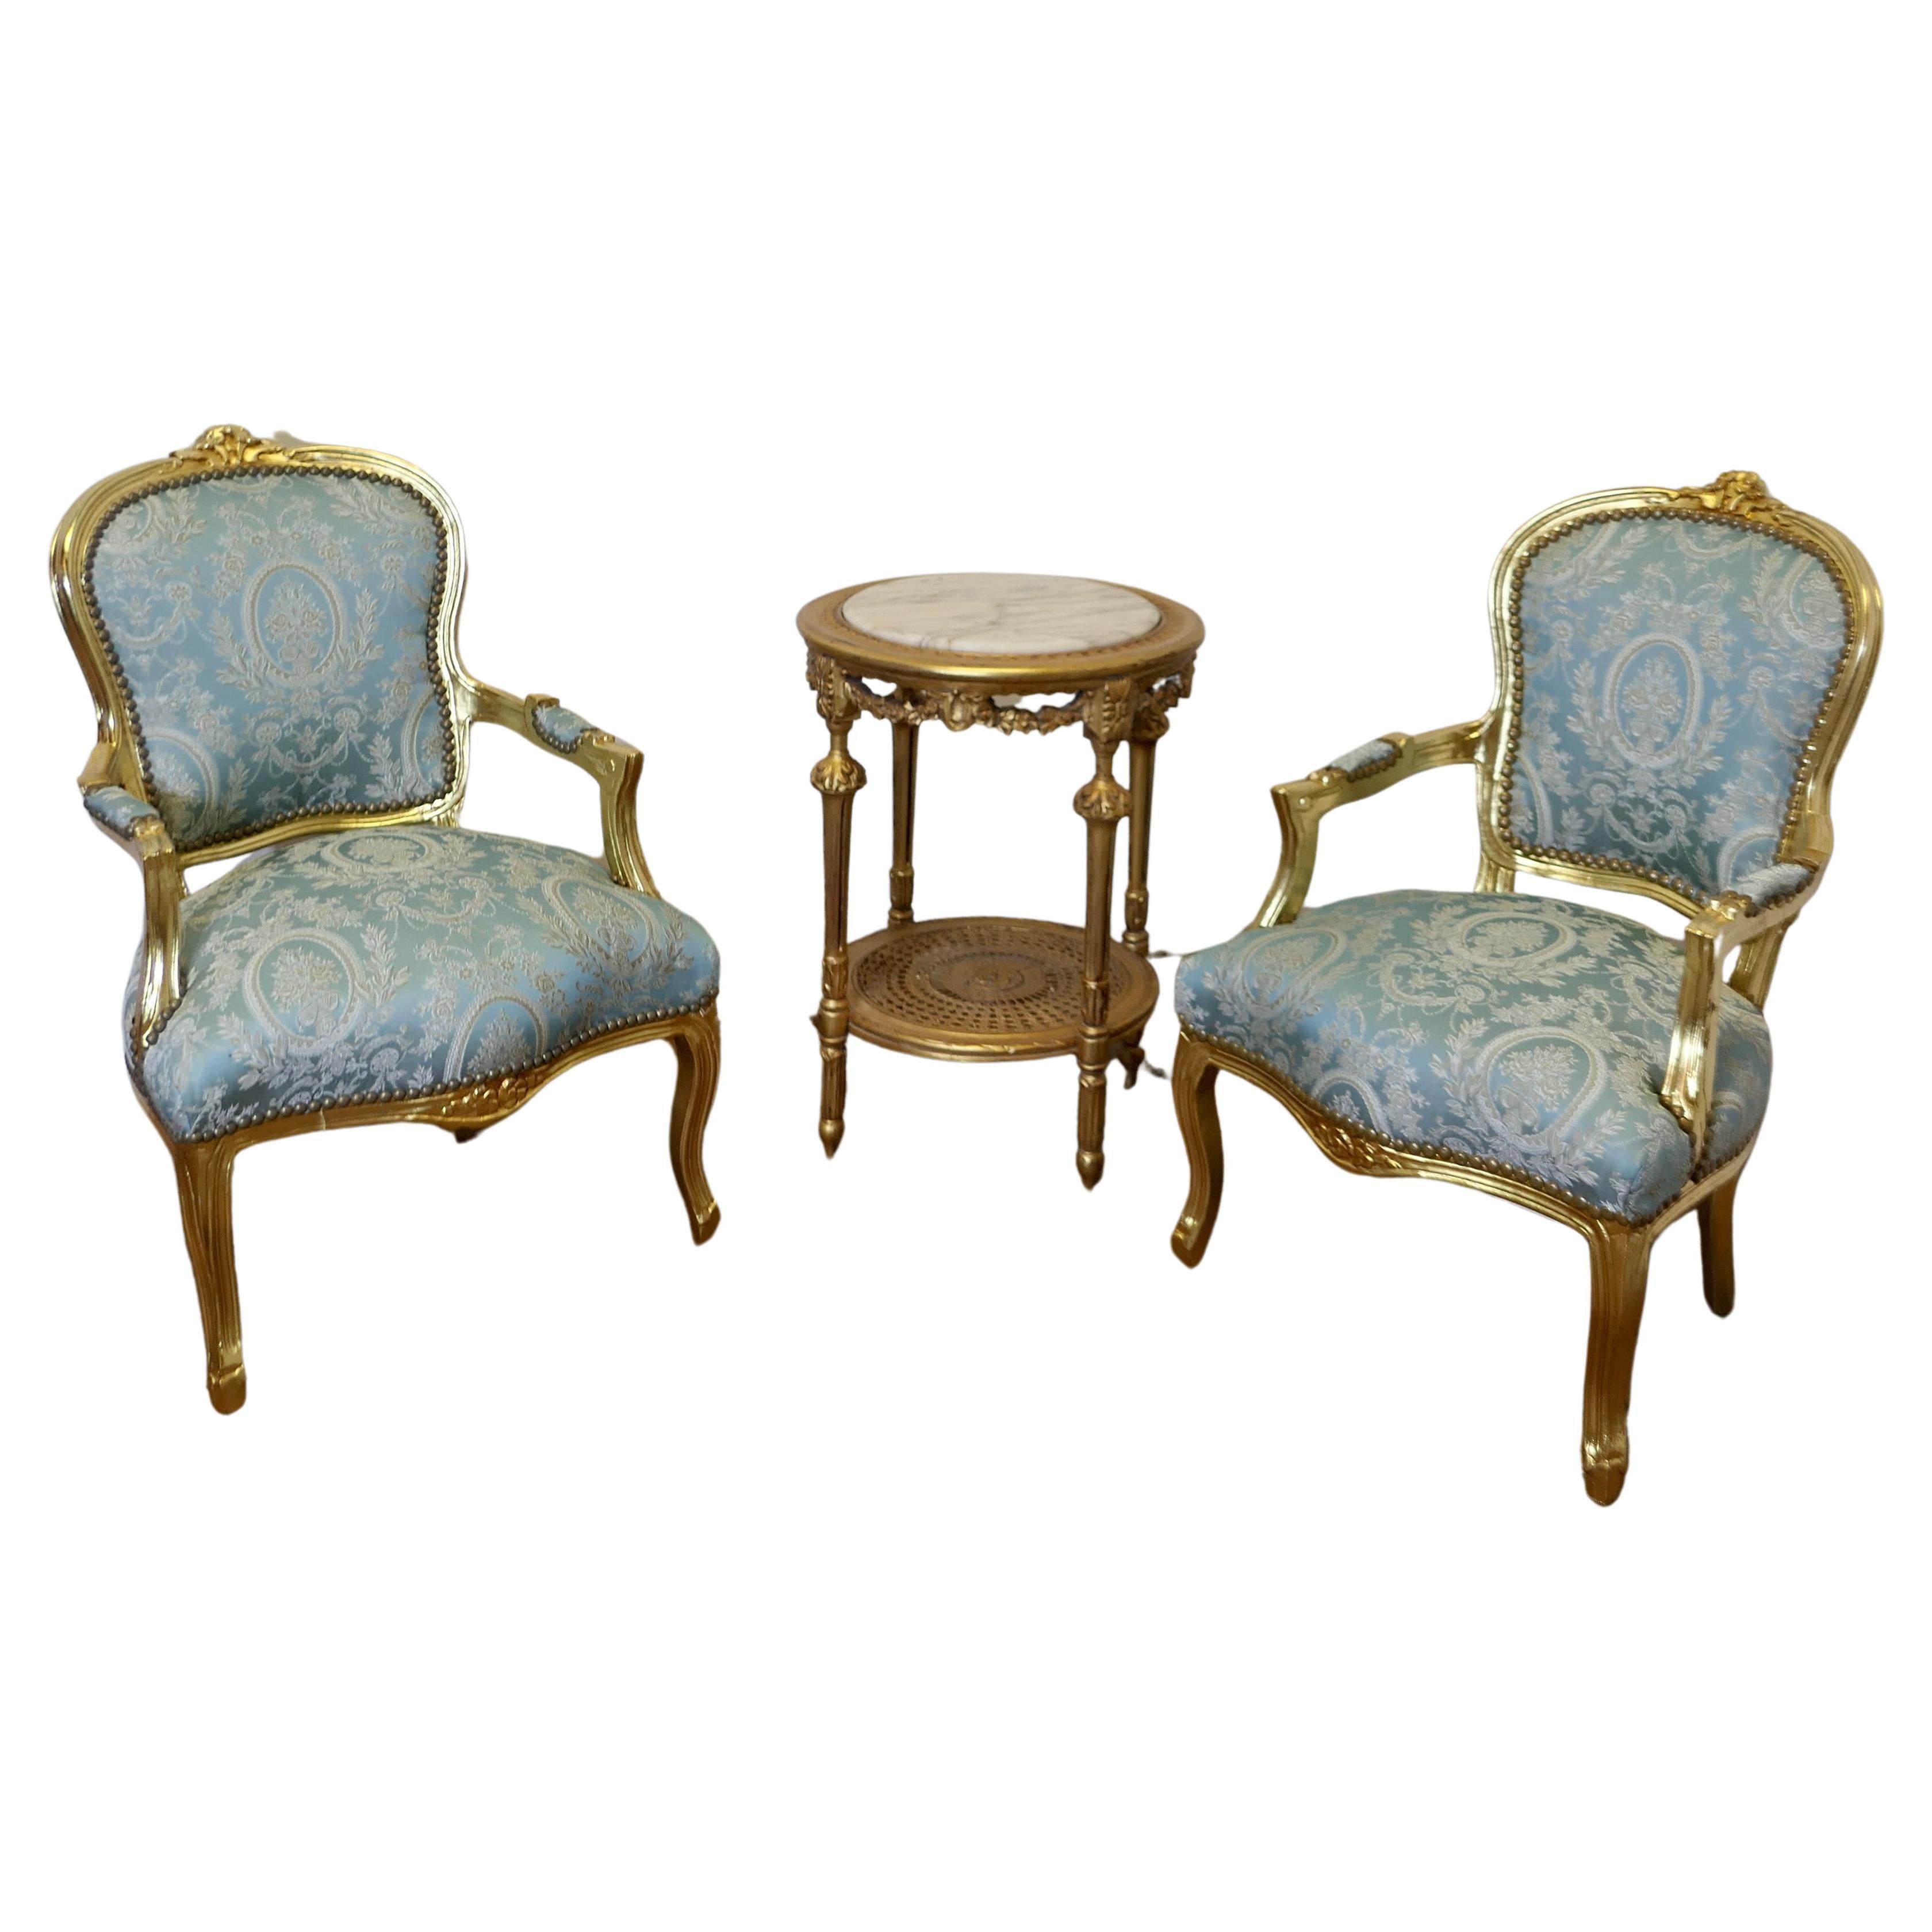 A Superb Pair of French 19th Century Gilt Salon Chairs    For Sale